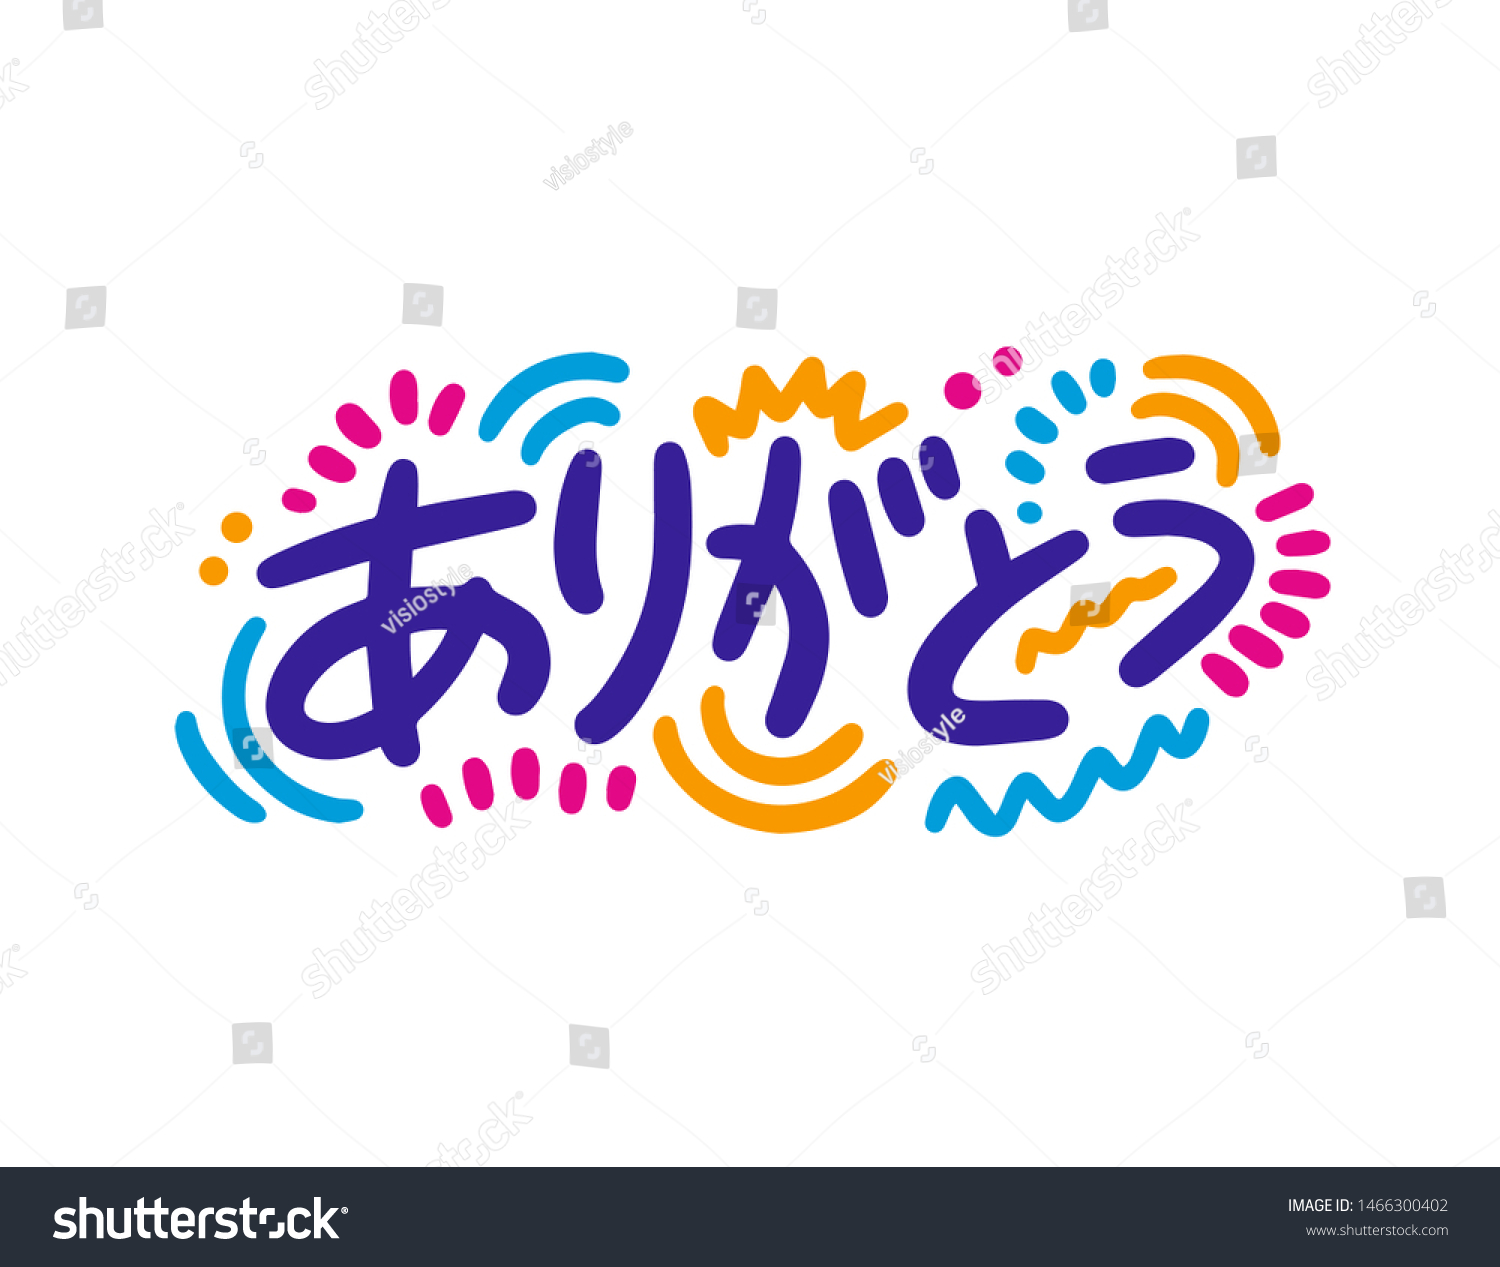 Digital download Characters Thank You! PNG, SVG, JPG Arigatou Japanese Calligraphy Words